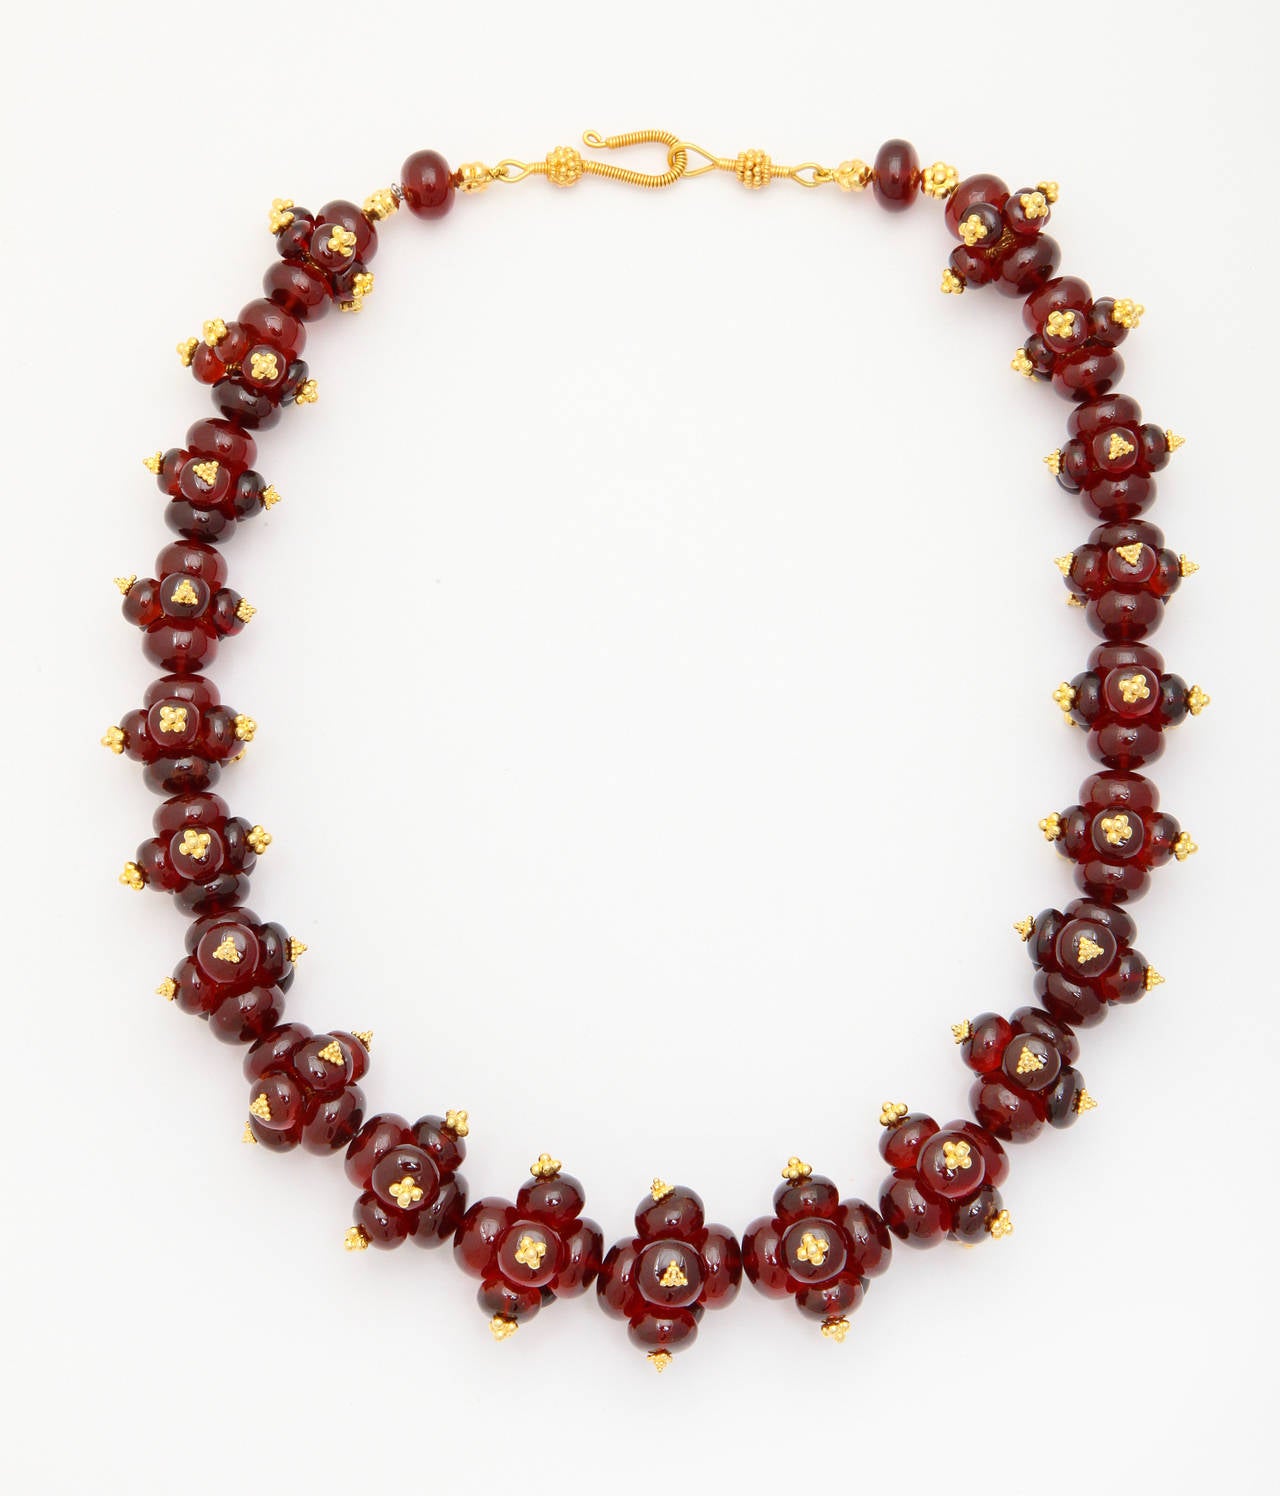 A necklace composed of garnet beads, 18kt yellow gold granulated flower beads and an 18kt yellow gold clasp.